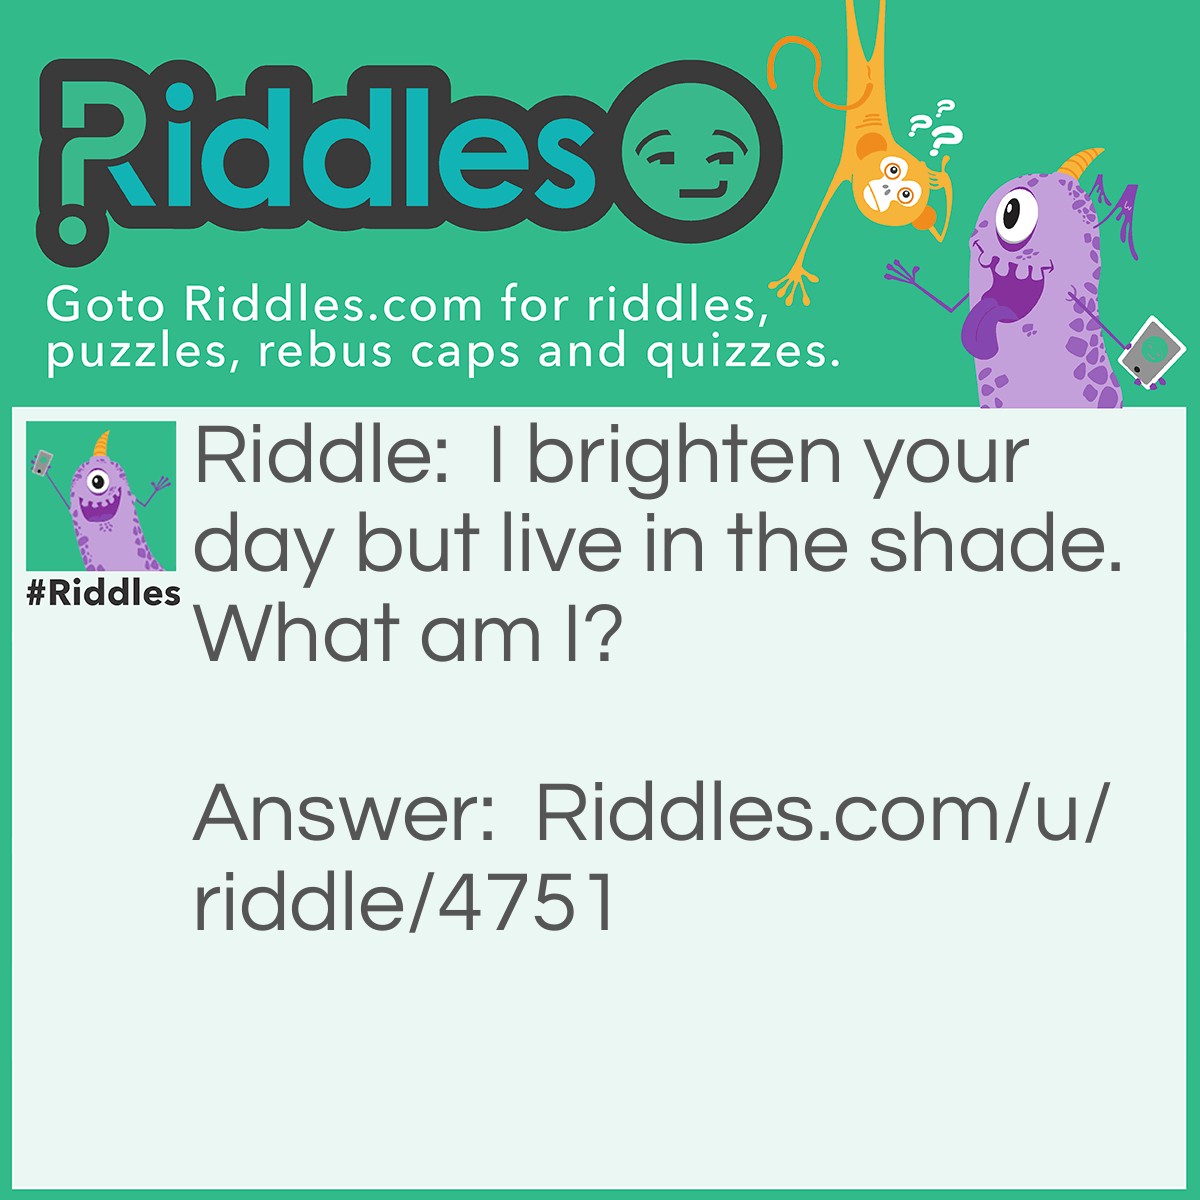 Riddle: I brighten your day but live in the shade. What am I? Answer: A lamp.